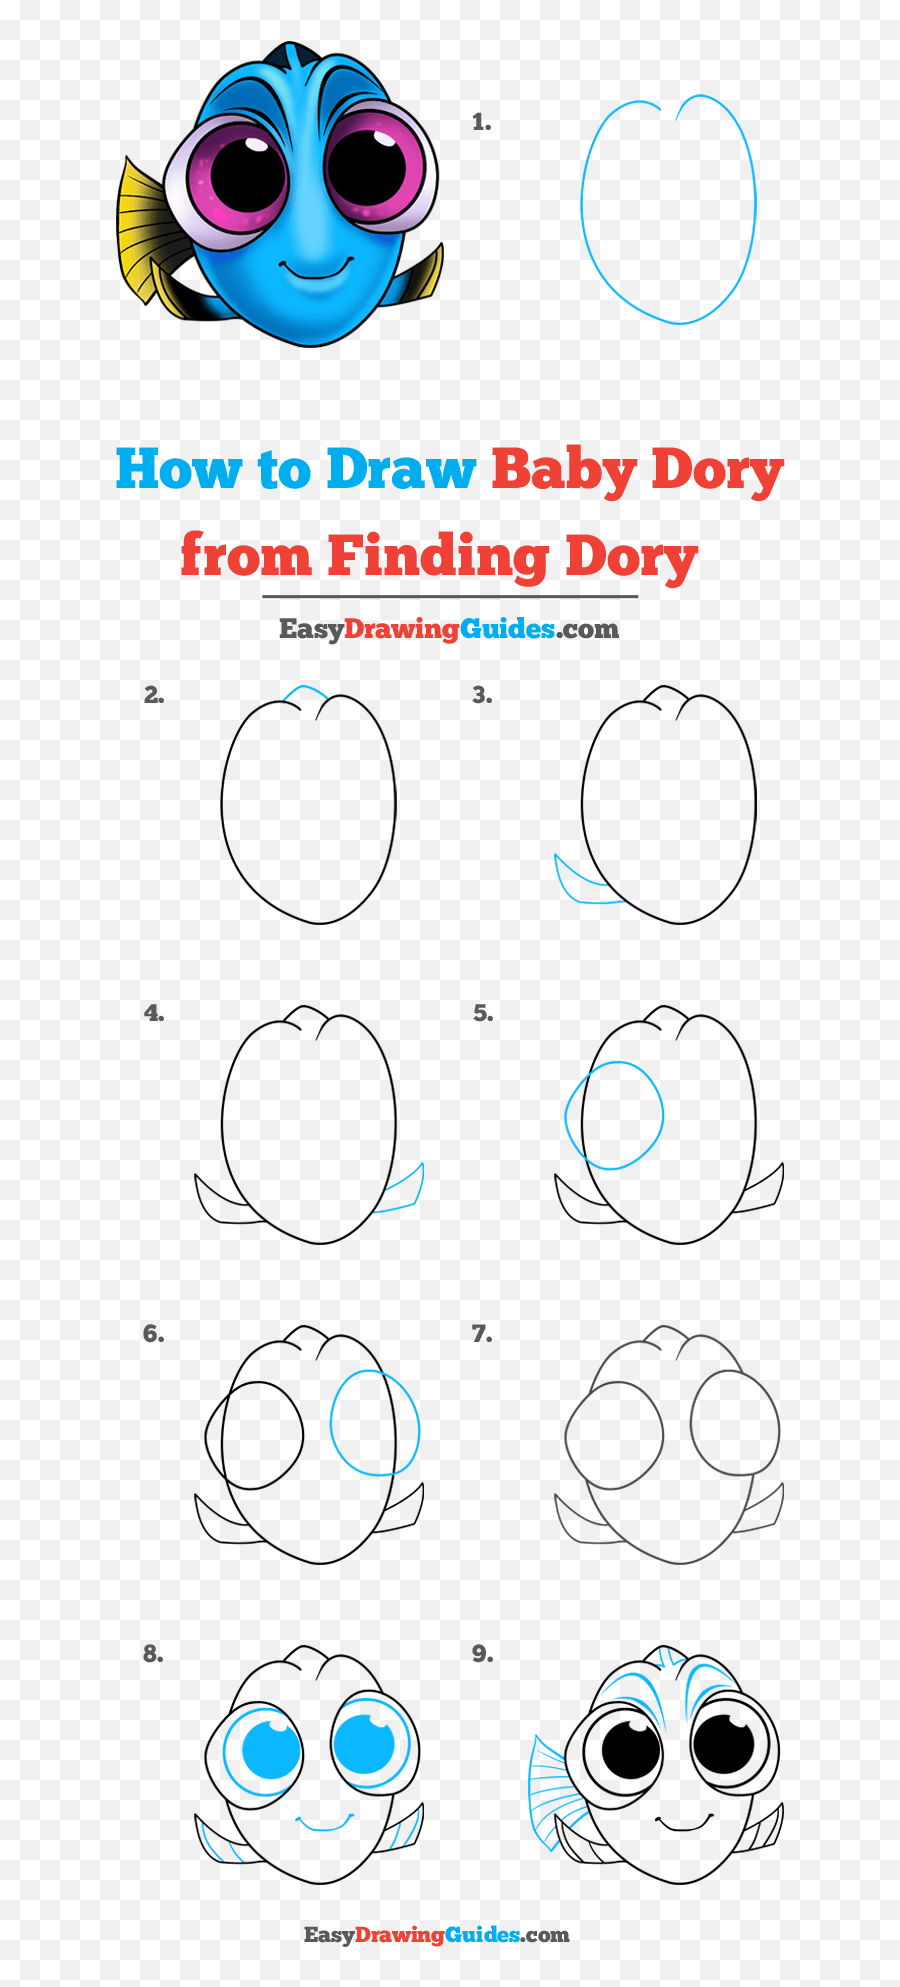 How To Draw Baby Dory From Finding Dory - Really Easy Draw Baby Dory Step By Step Emoji,Dory Fish Emoji